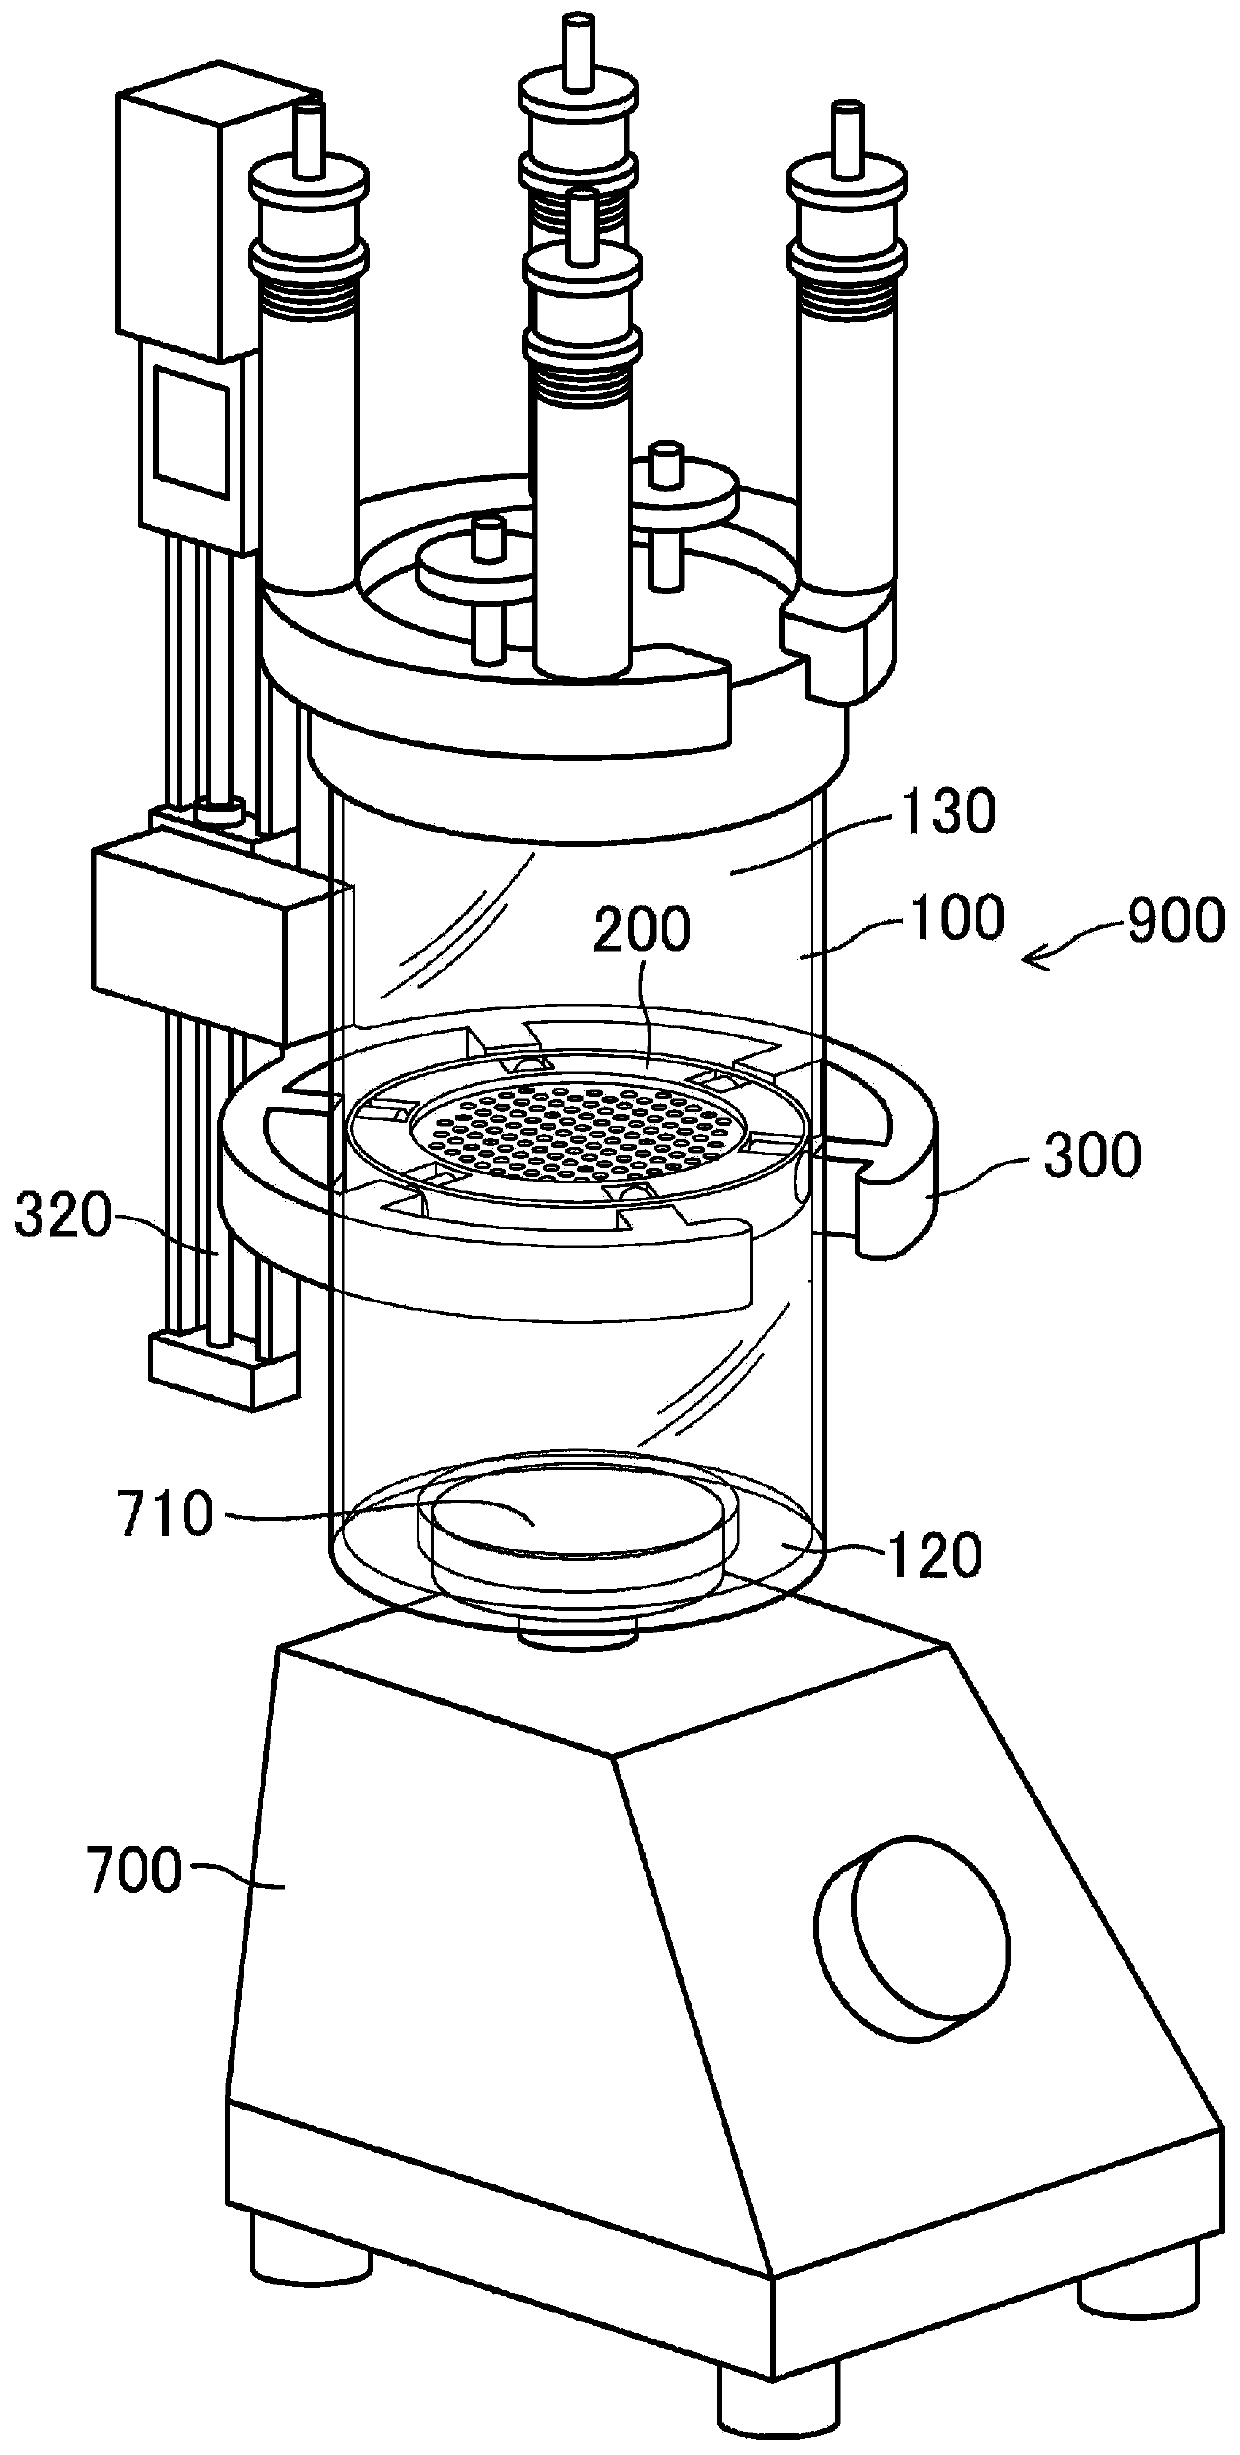 Cell culture device